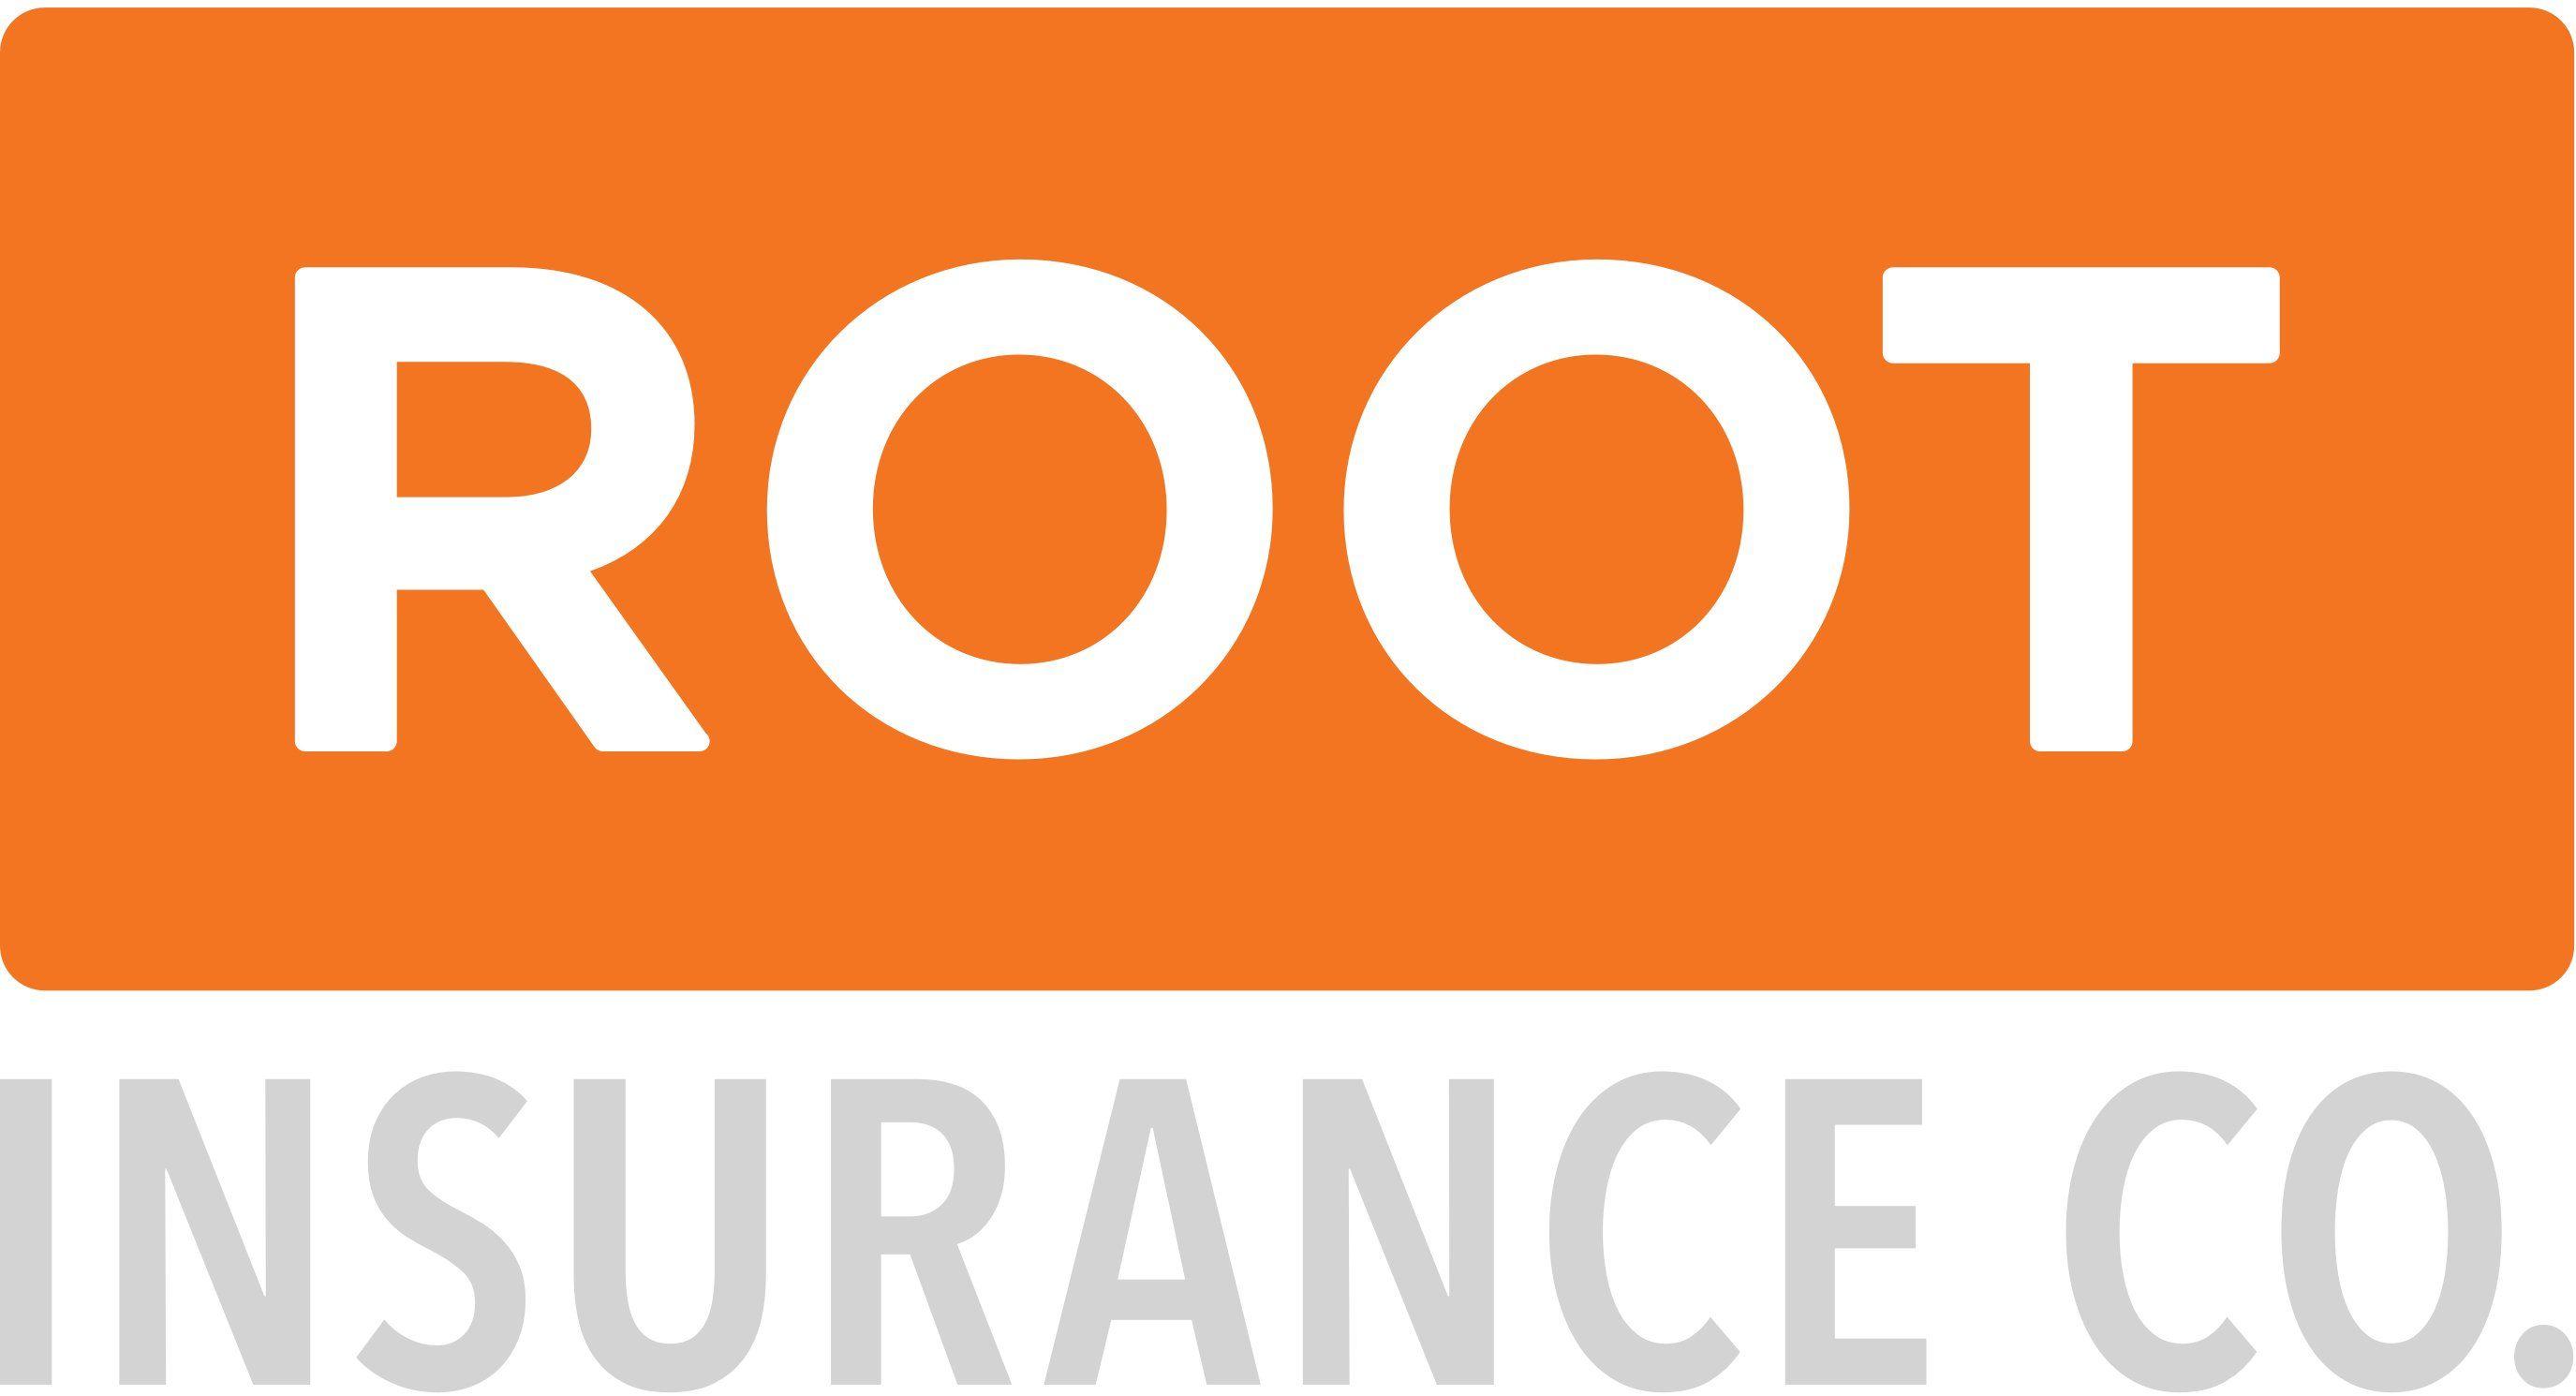 Automotive Insurance Logo - Root Car Insurance | Low rates for good drivers - Download our app